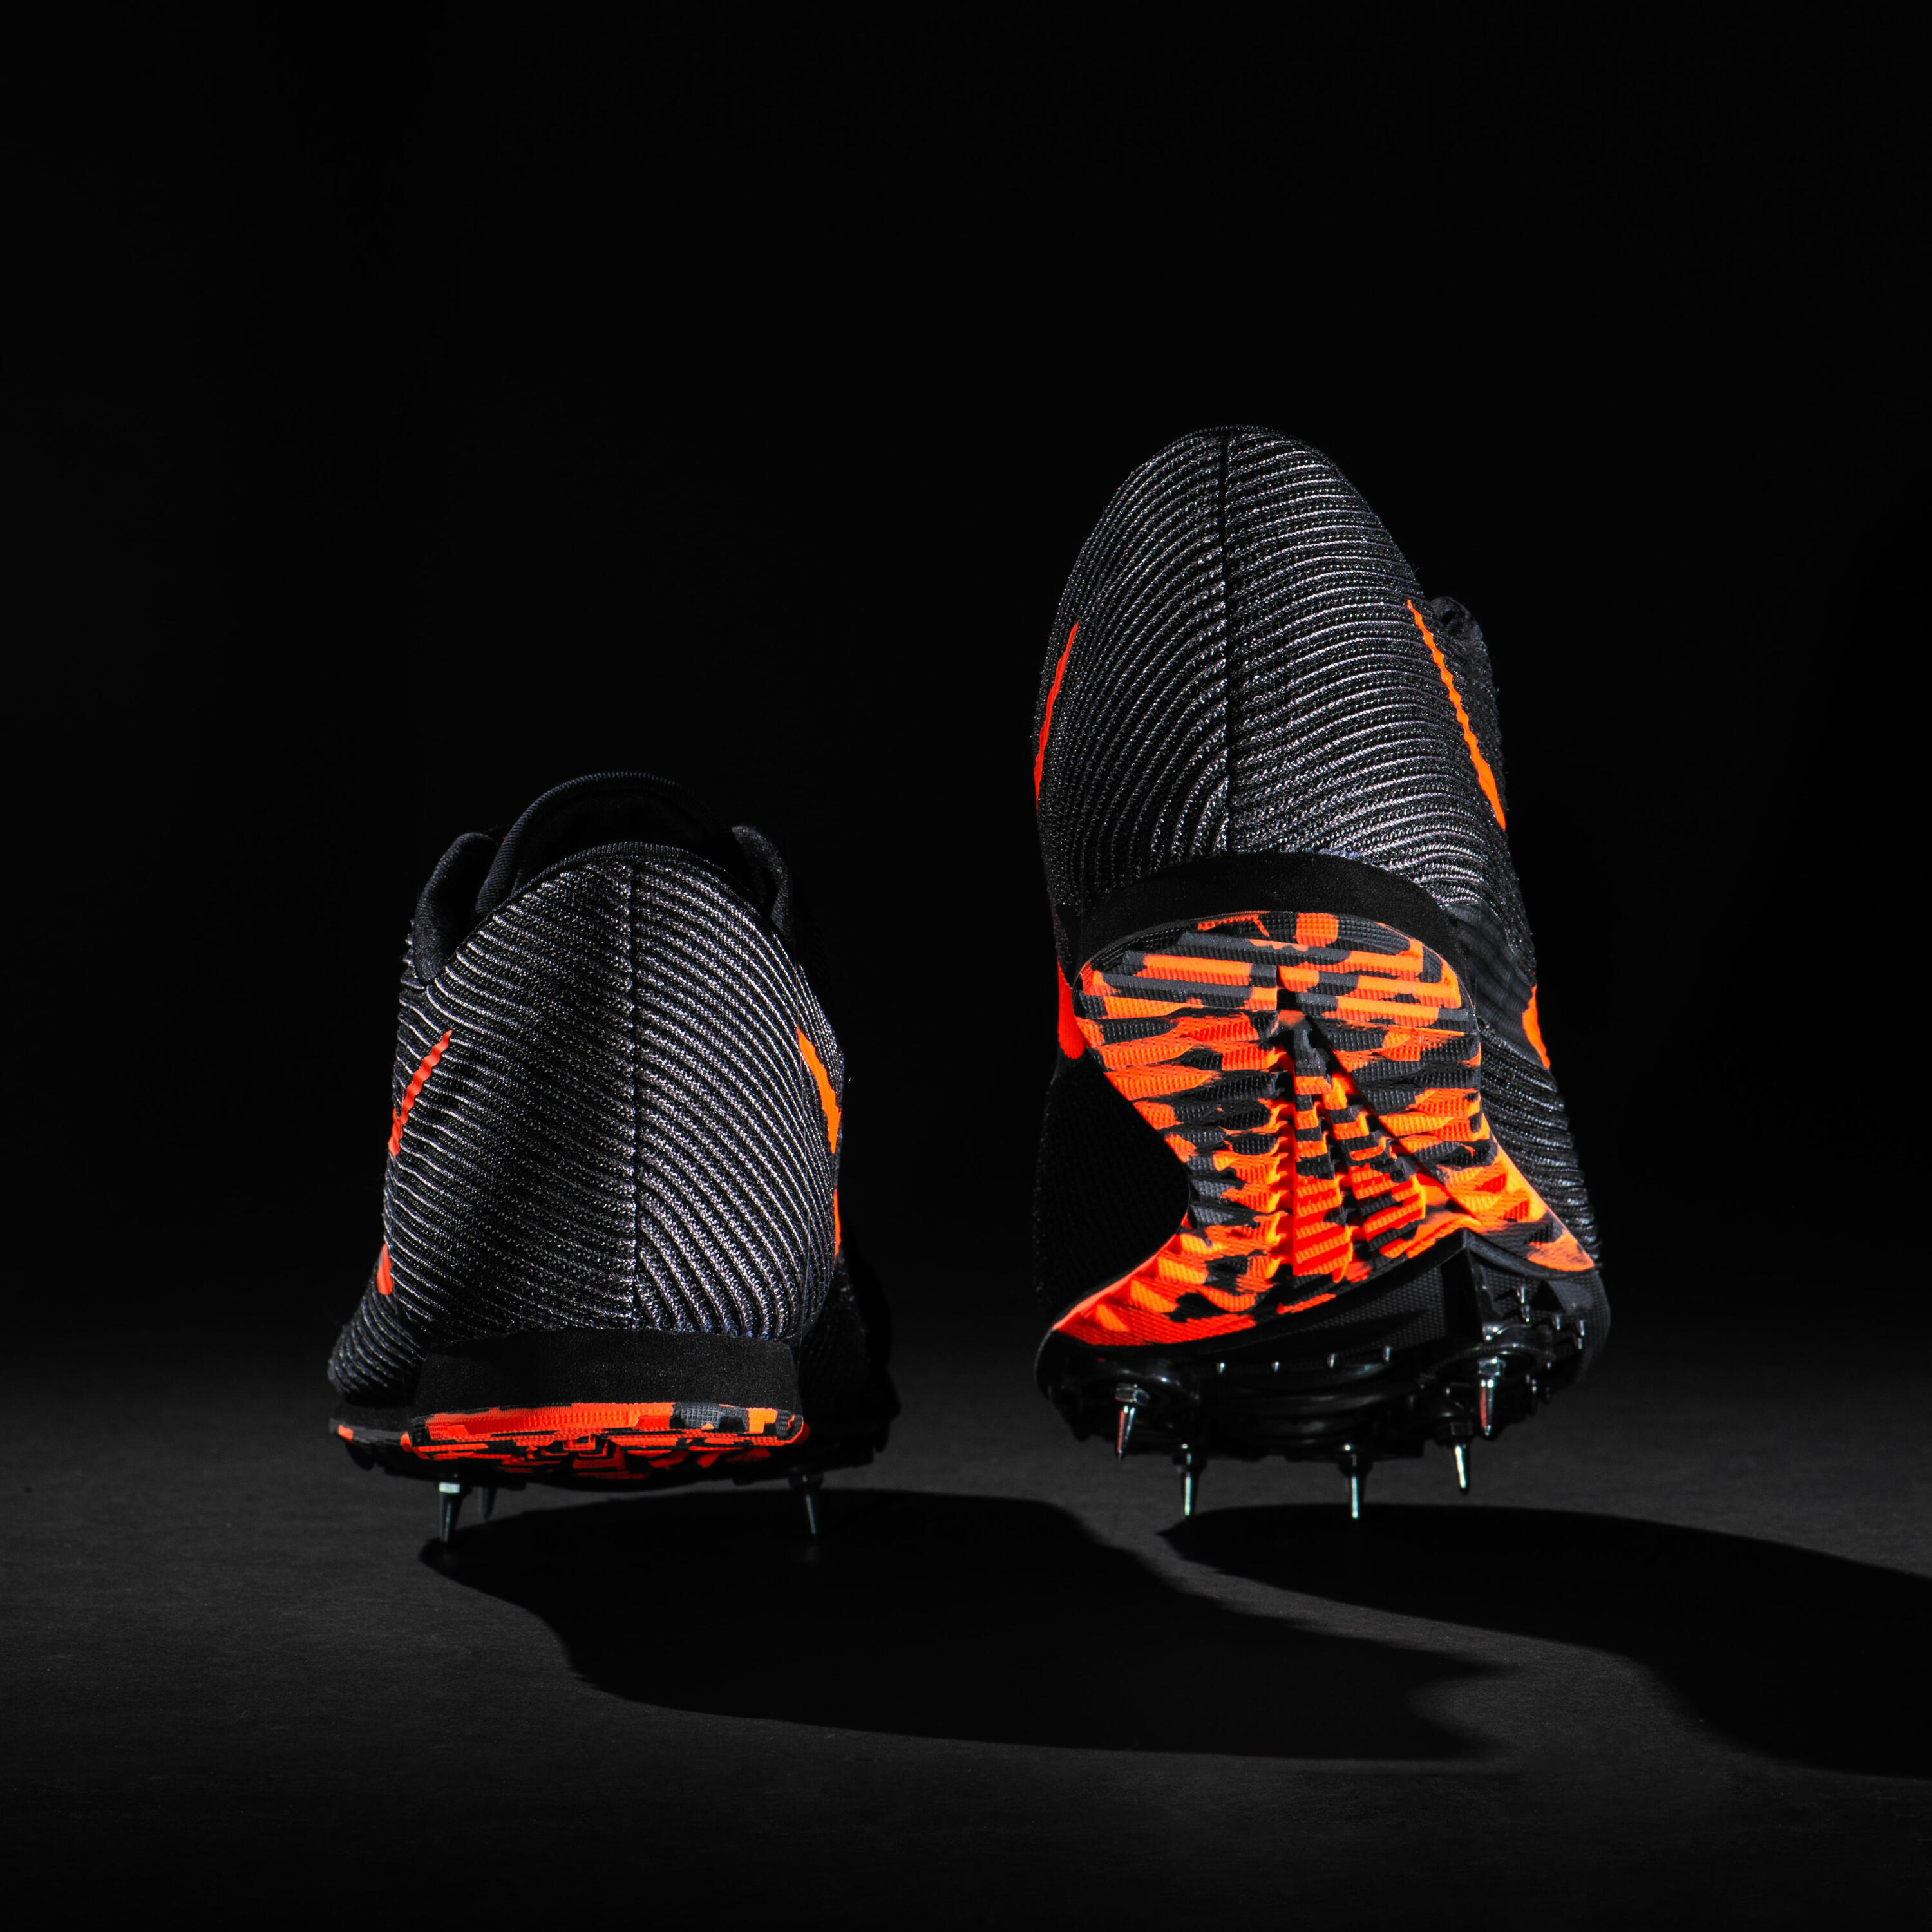 ATHLETICS CROSS-COUNTRY SHOES WITH SPIKES - BLACK/ORANGE 5/8